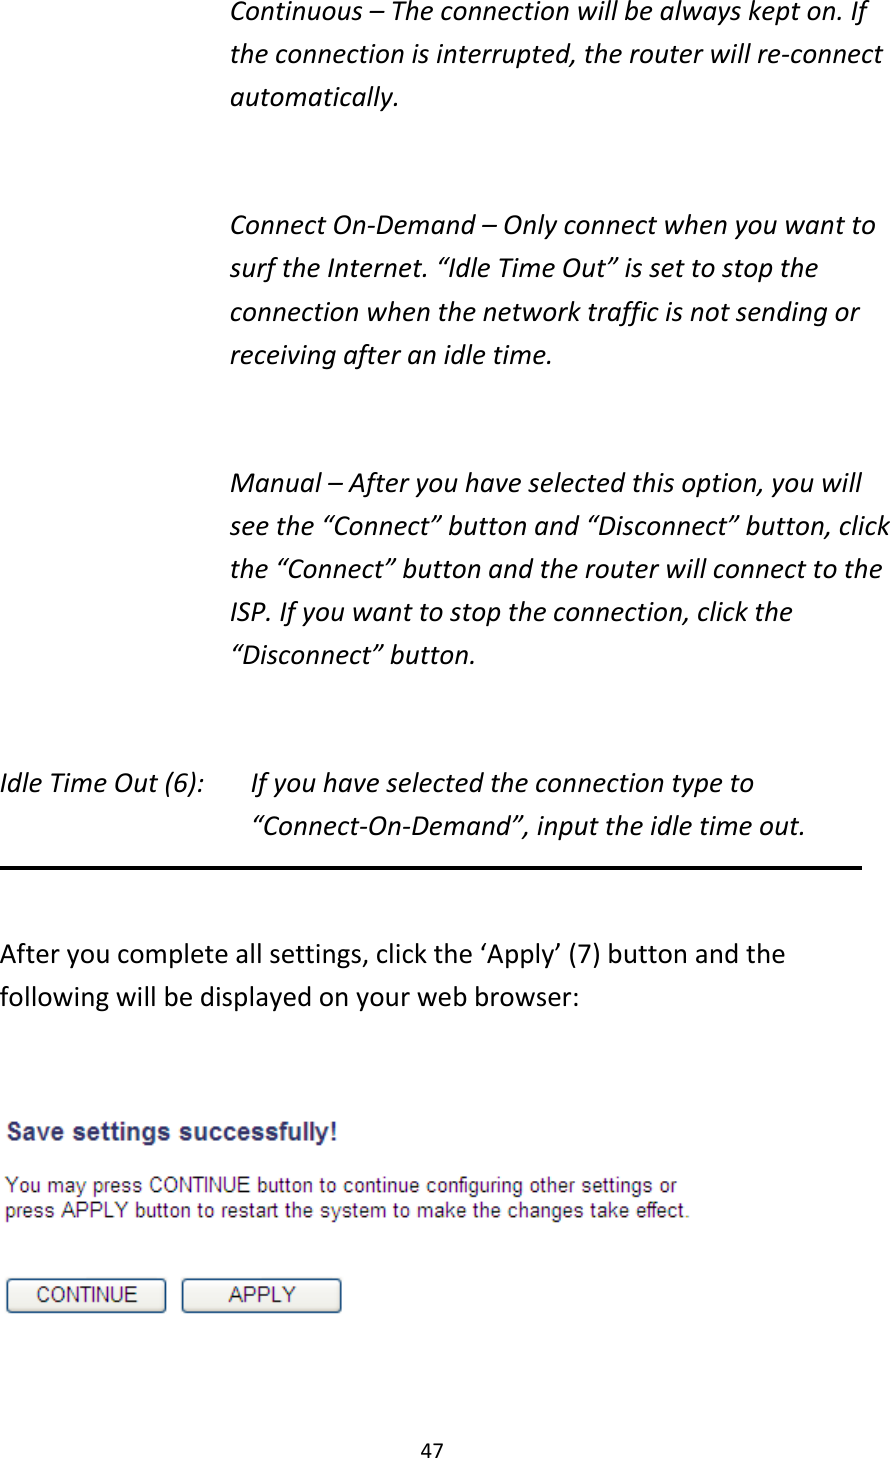 47 Continuous – The connection will be always kept on. If the connection is interrupted, the router will re-connect automatically.  Connect On-Demand – Only connect when you want to surf the Internet. “Idle Time Out” is set to stop the connection when the network traffic is not sending or receiving after an idle time.  Manual – After you have selected this option, you will see the “Connect” button and “Disconnect” button, click the “Connect” button and the router will connect to the ISP. If you want to stop the connection, click the “Disconnect” button.  Idle Time Out (6):    If you have selected the connection type to “Connect-On-Demand”, input the idle time out.  After you complete all settings, click the ‘Apply’ (7) button and the following will be displayed on your web browser:    